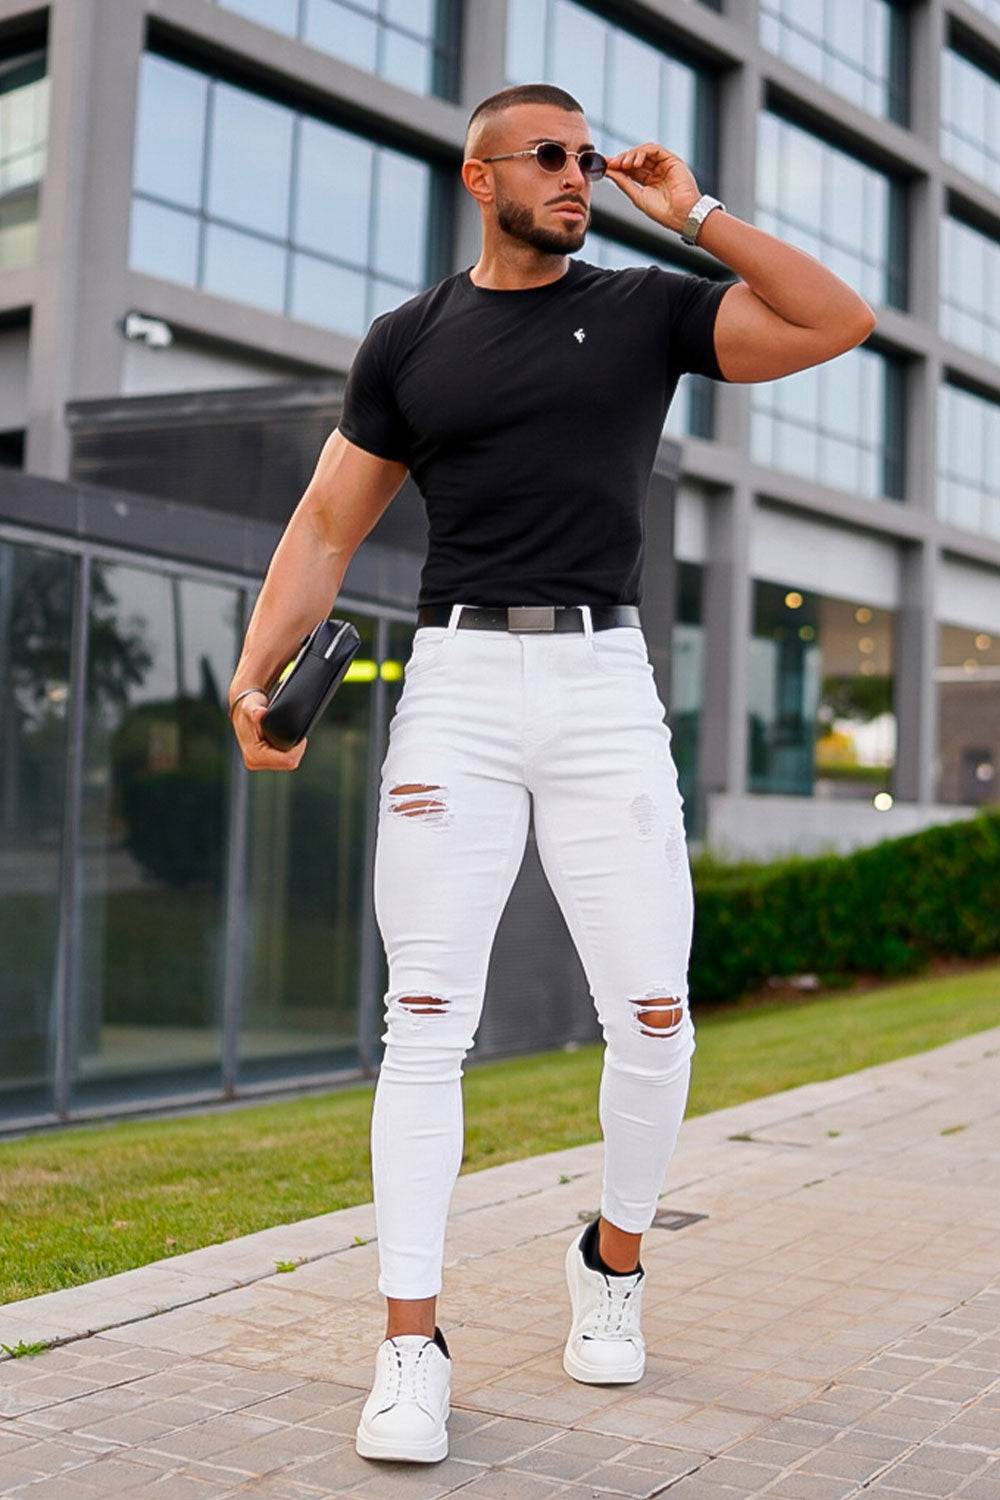 Gingtto Men's Stretch White Ripped Jeans: The Perfect Choice for Modern Men